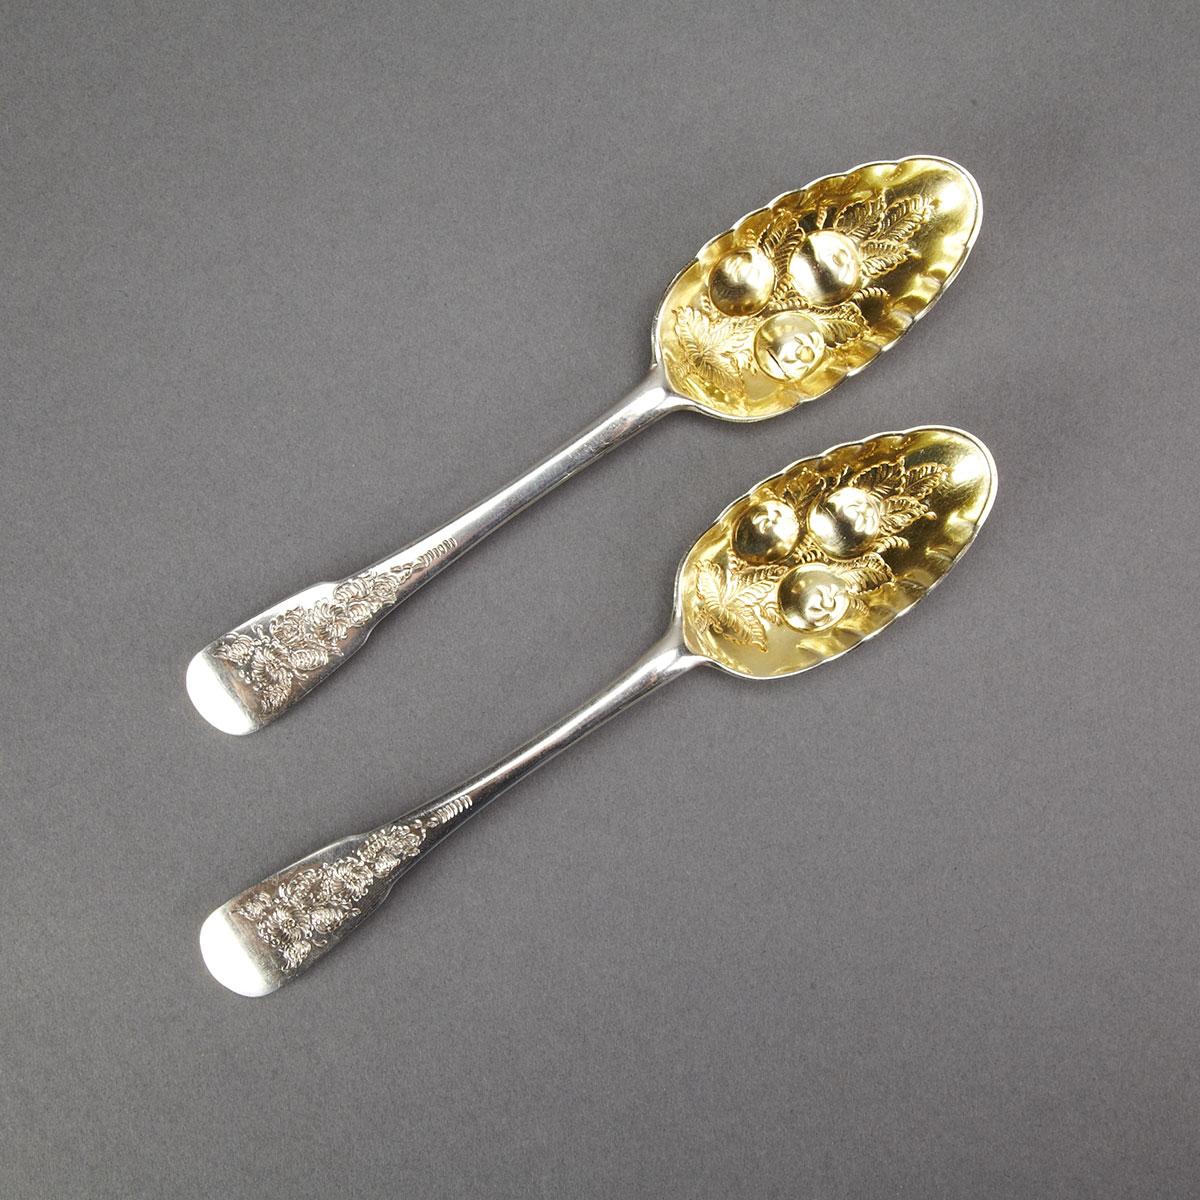 Pair of Scottish Provincial Silver Fiddle Pattern Berry Spoons, probably James Gordon II, Aberdeen, c.1820-25